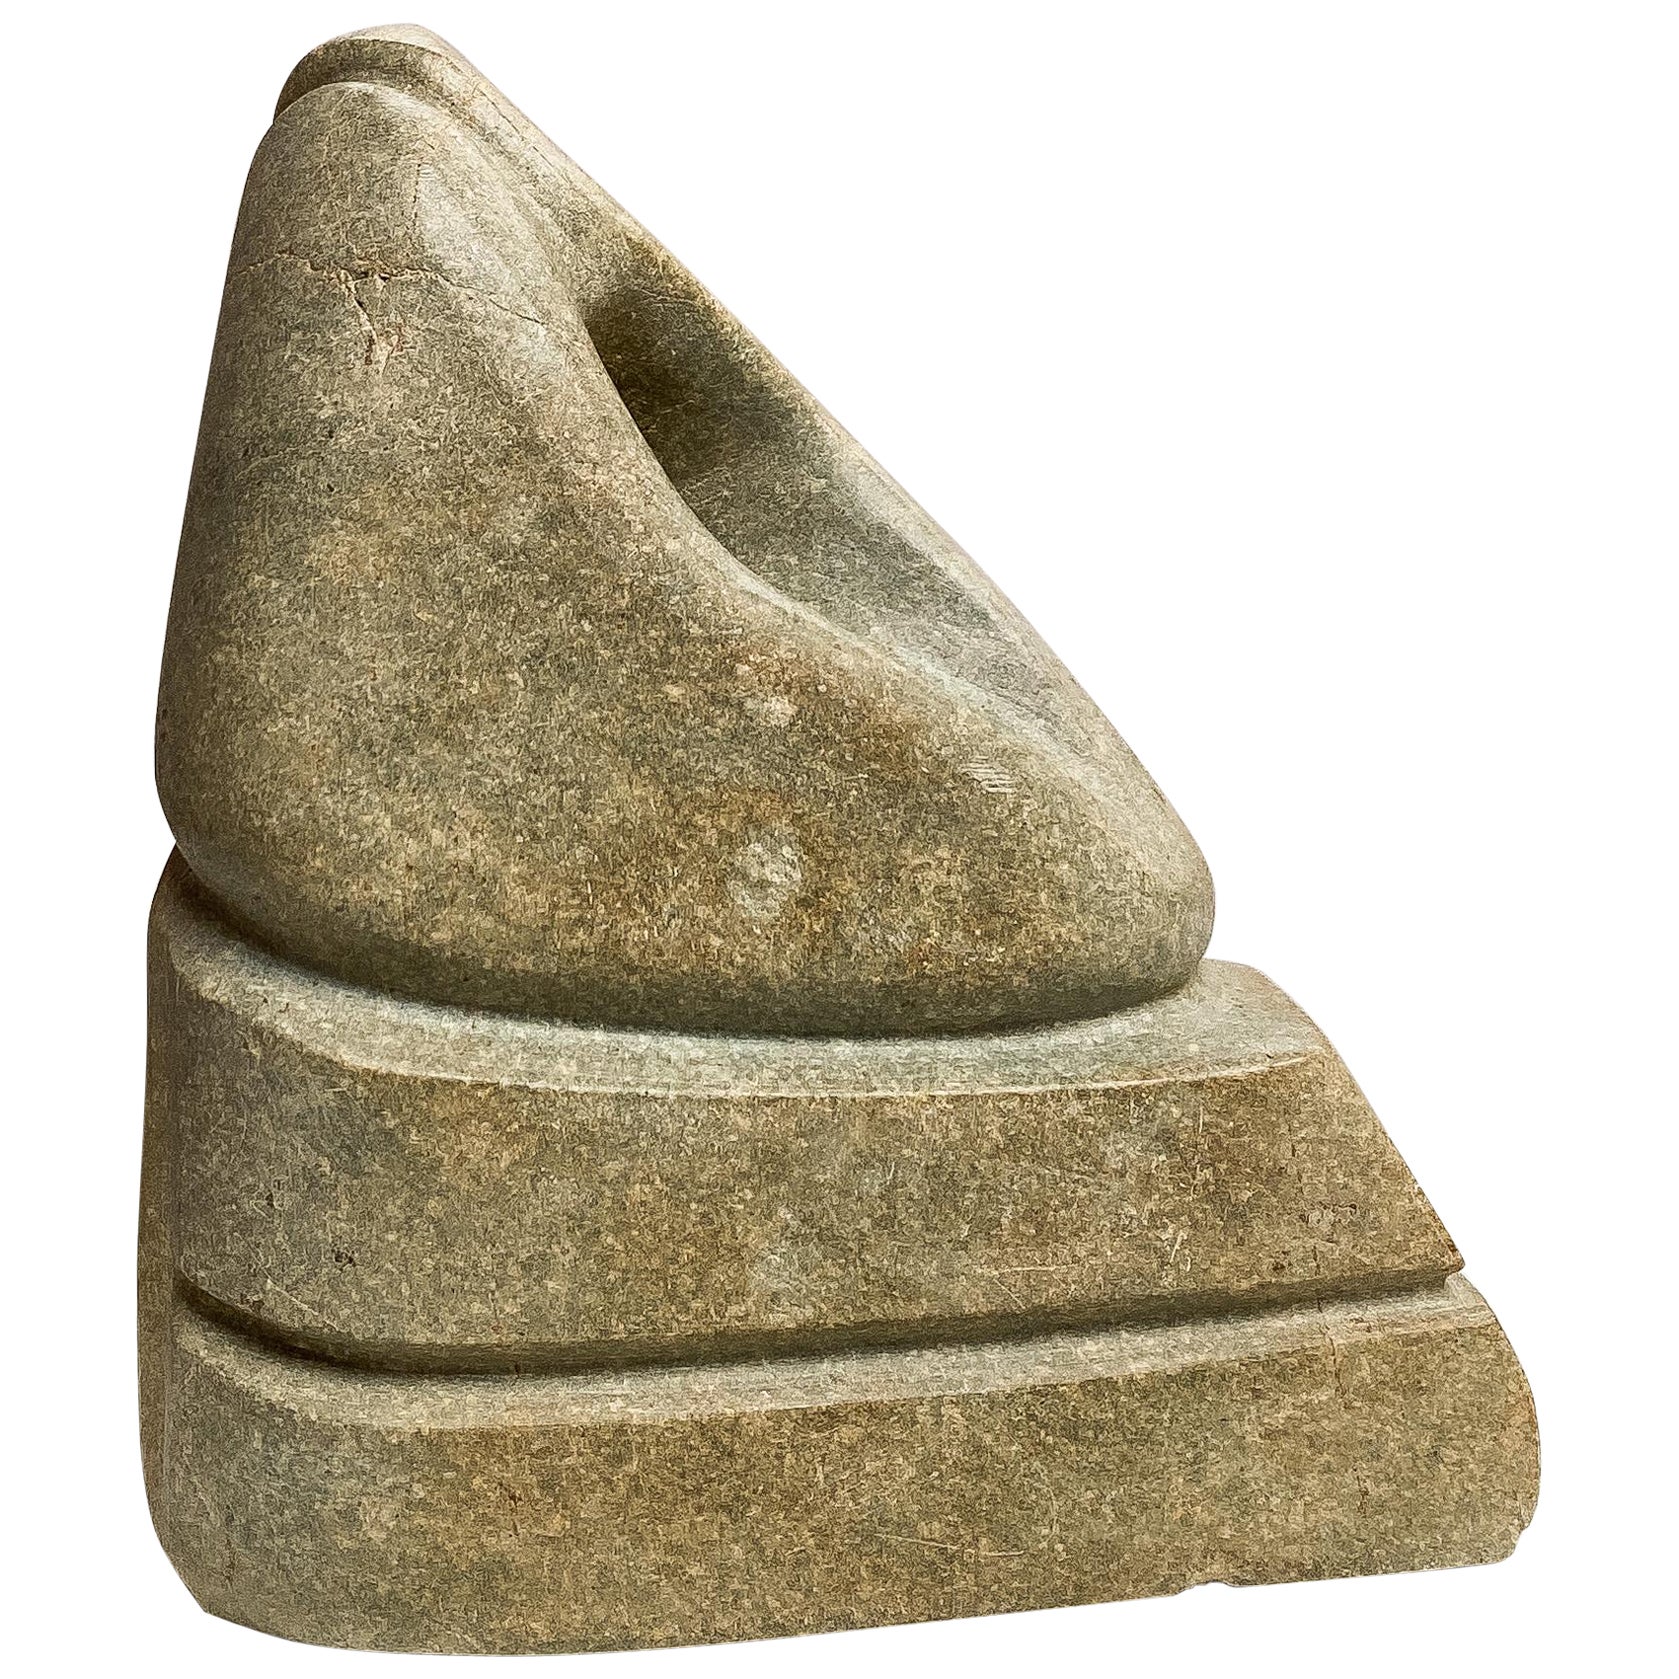 Organic shaped Abstract Mid-Century Sculpture in Greenish Stone, Hand Carved For Sale